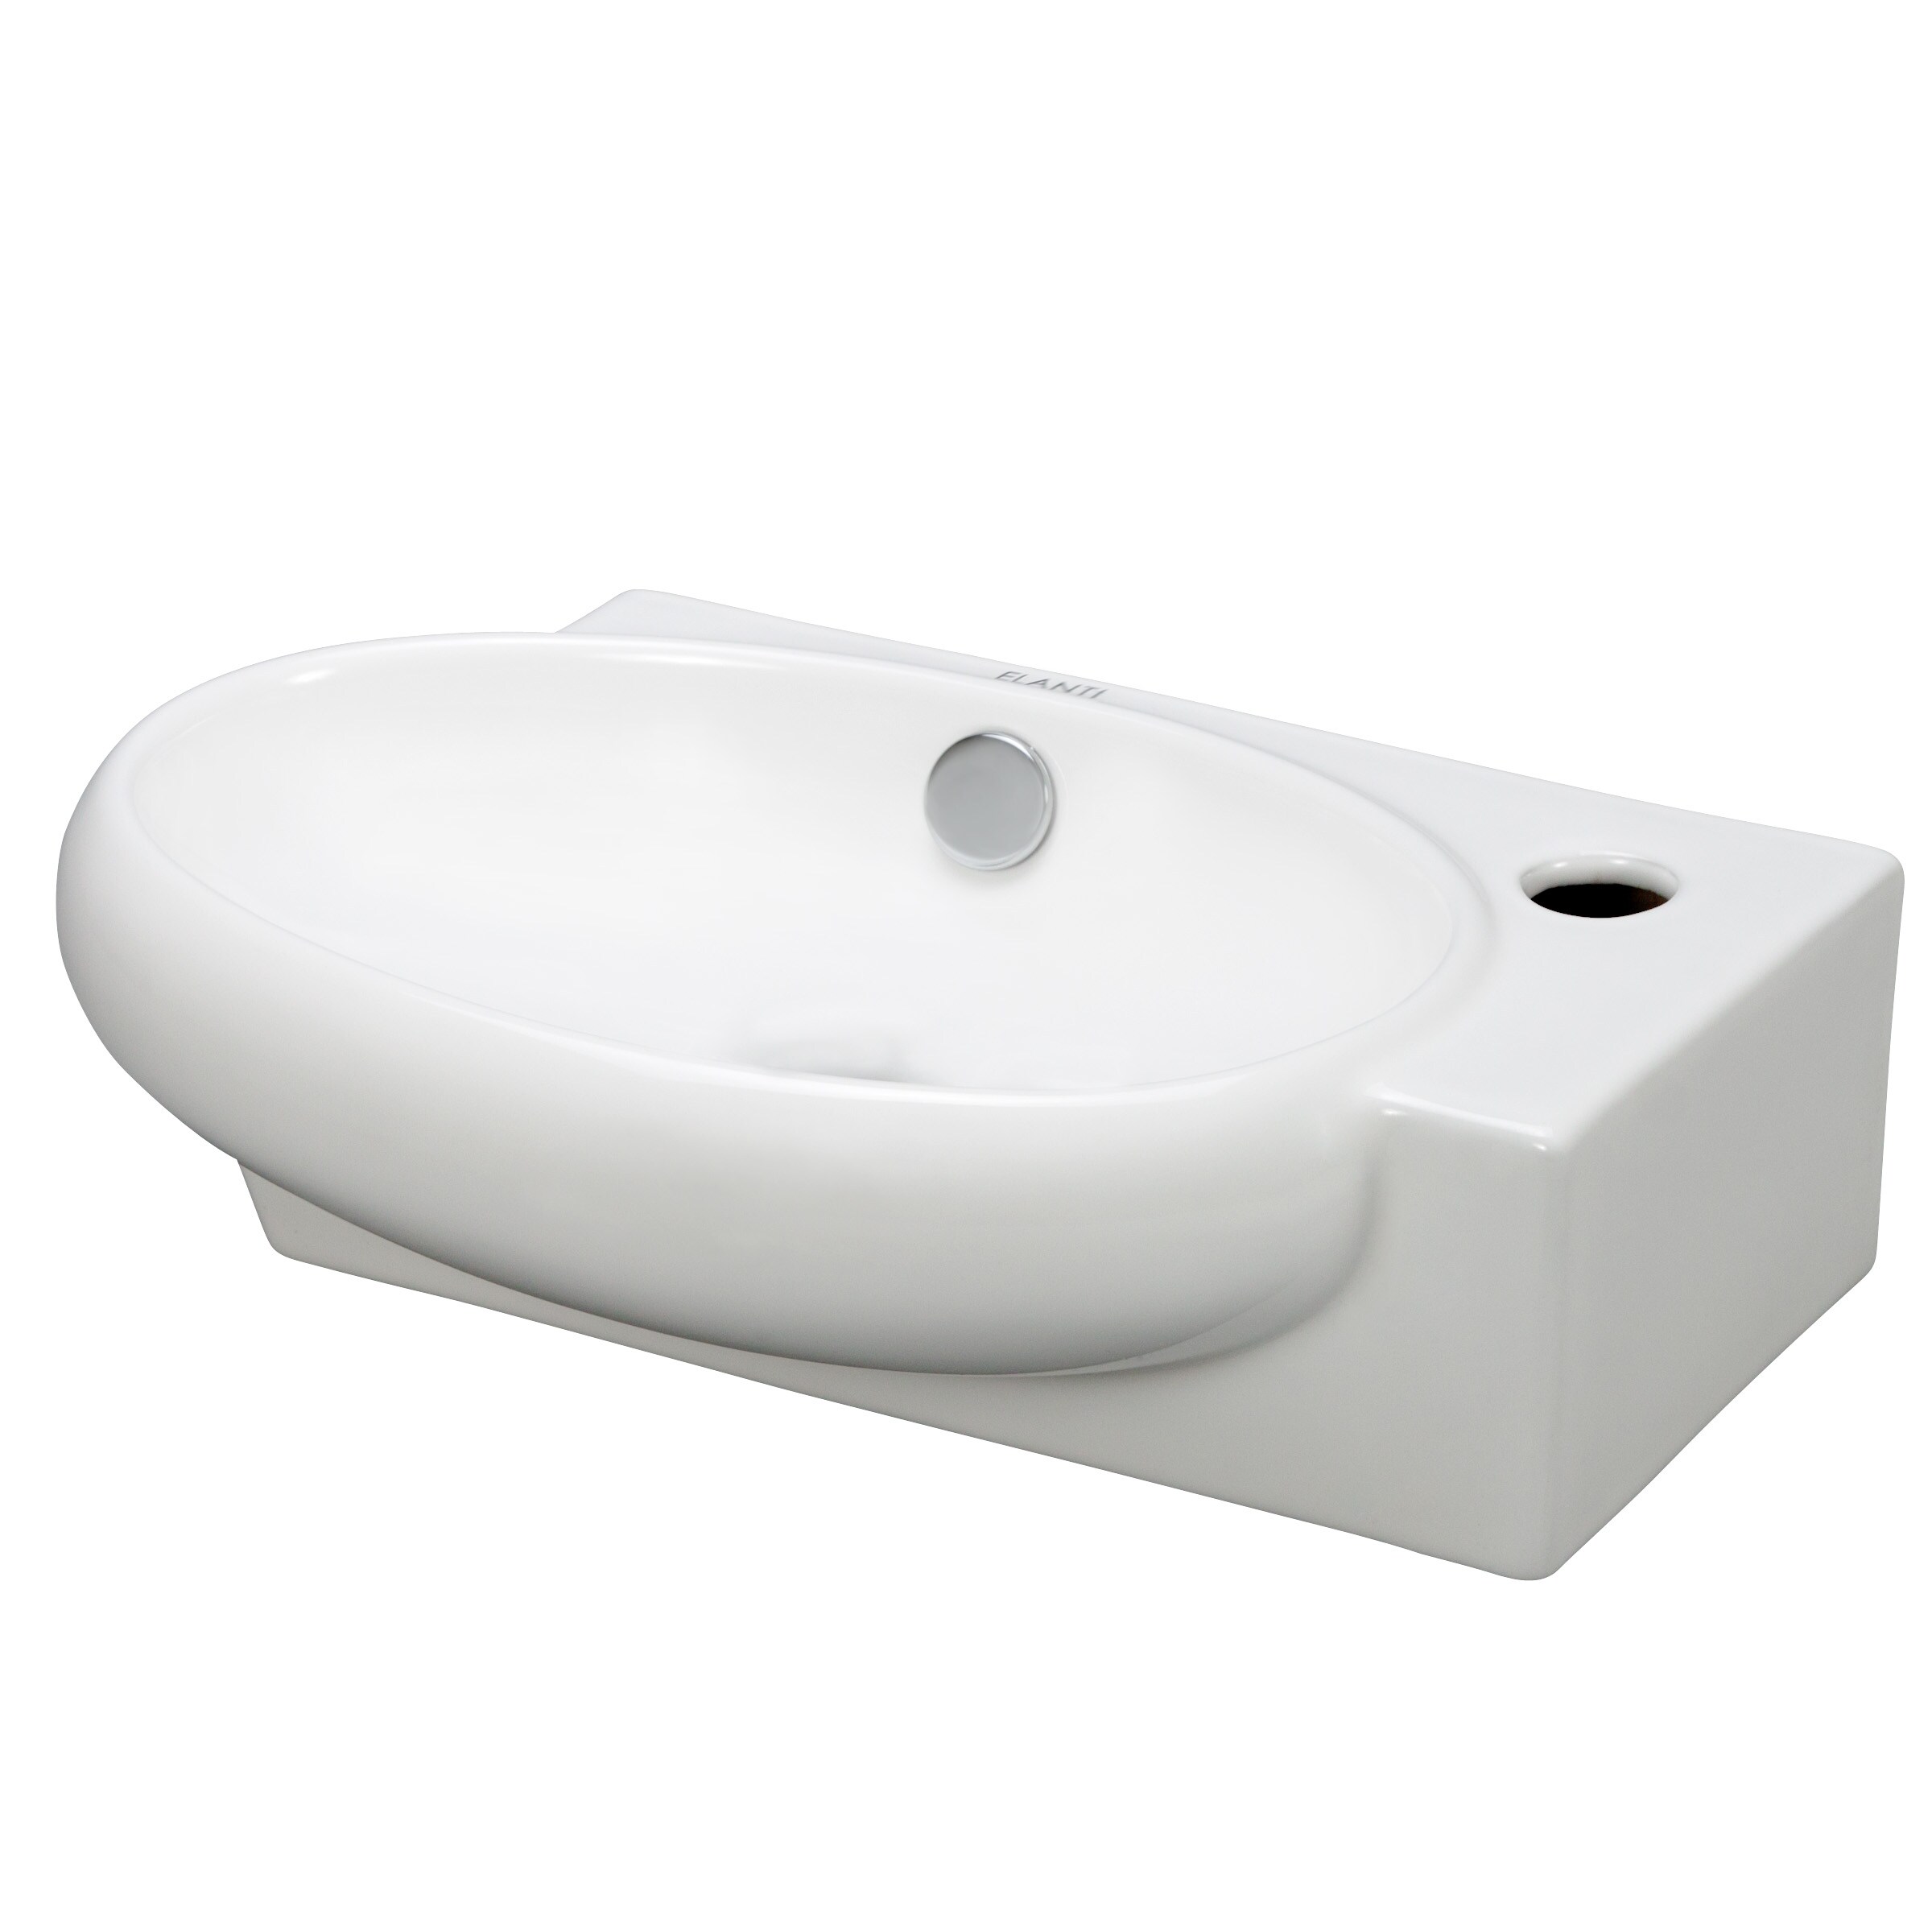 Elanti White Wall-mount Oval Bathroom Sink (16.875-in x 10.5-in) at ...